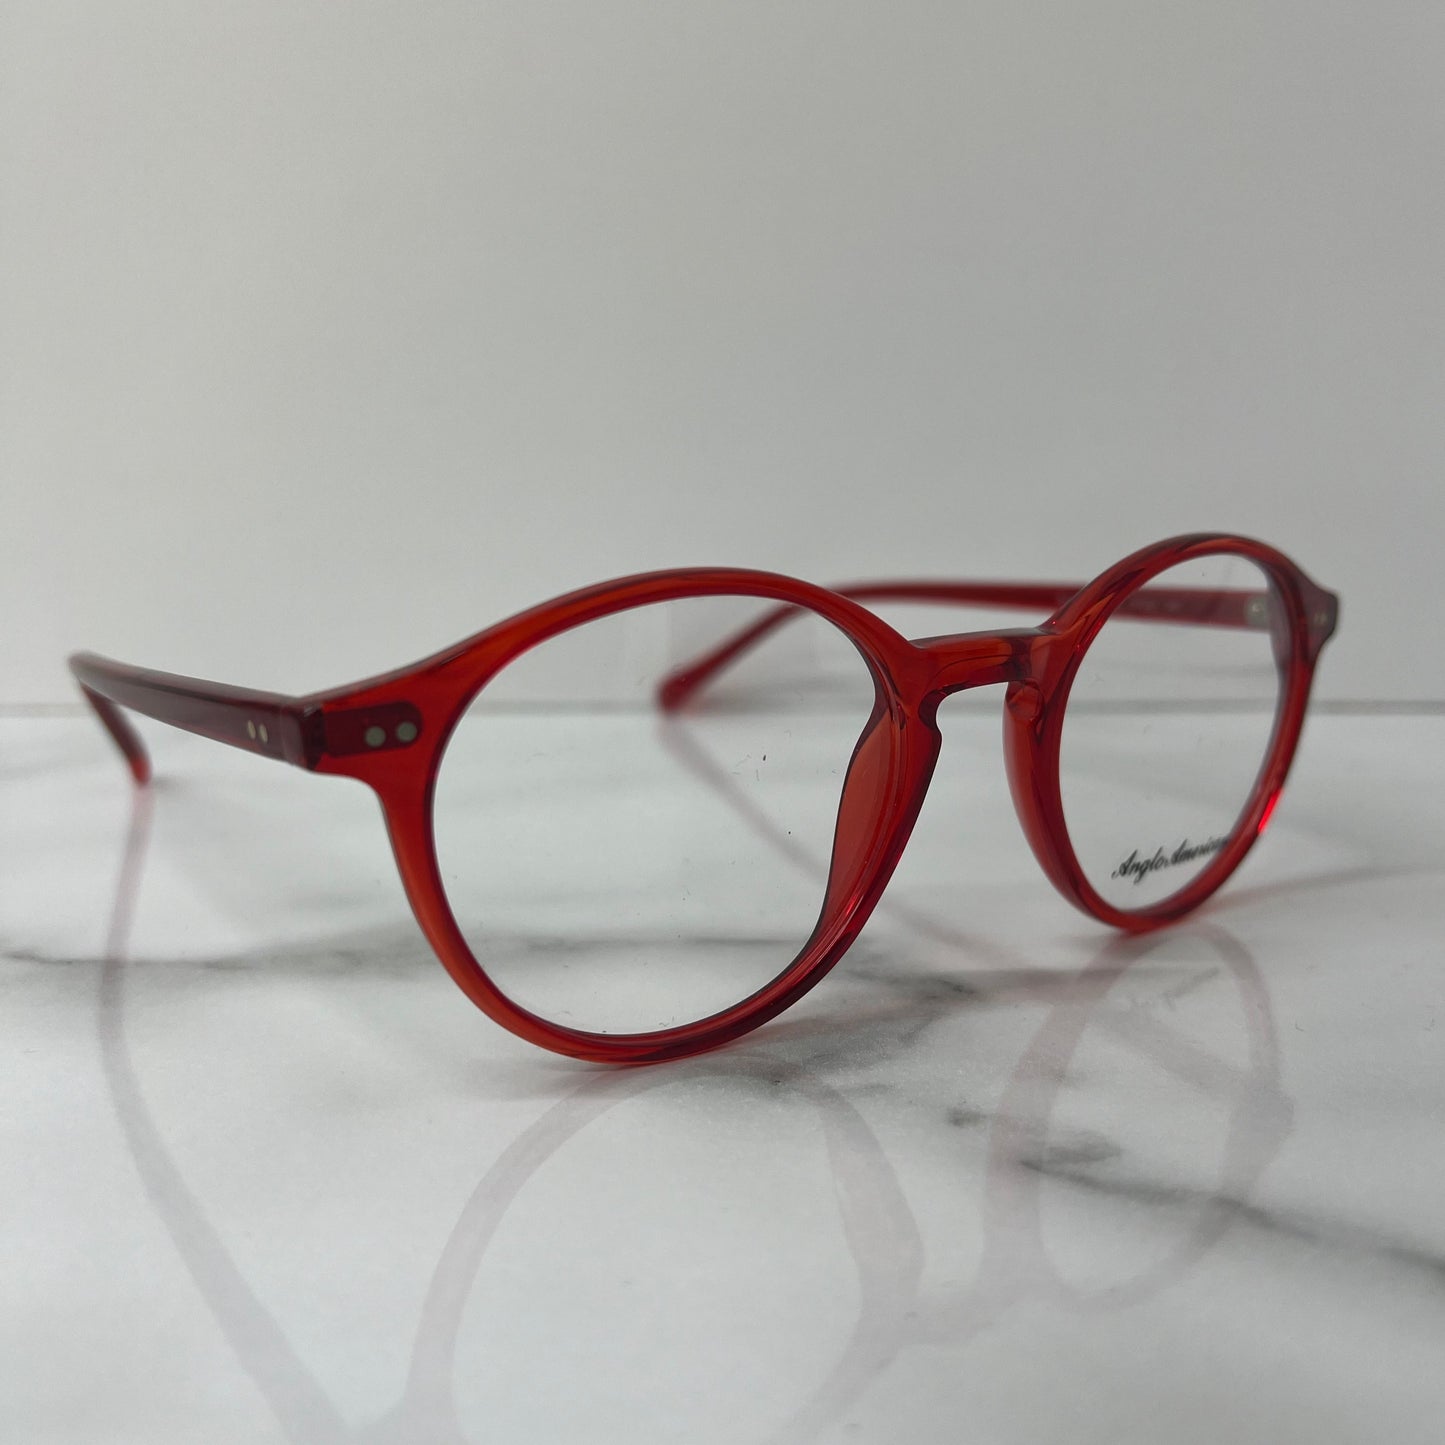 Anglo American 406 Optical Glasses Red 50mm England Designer Eyeglasses Classic